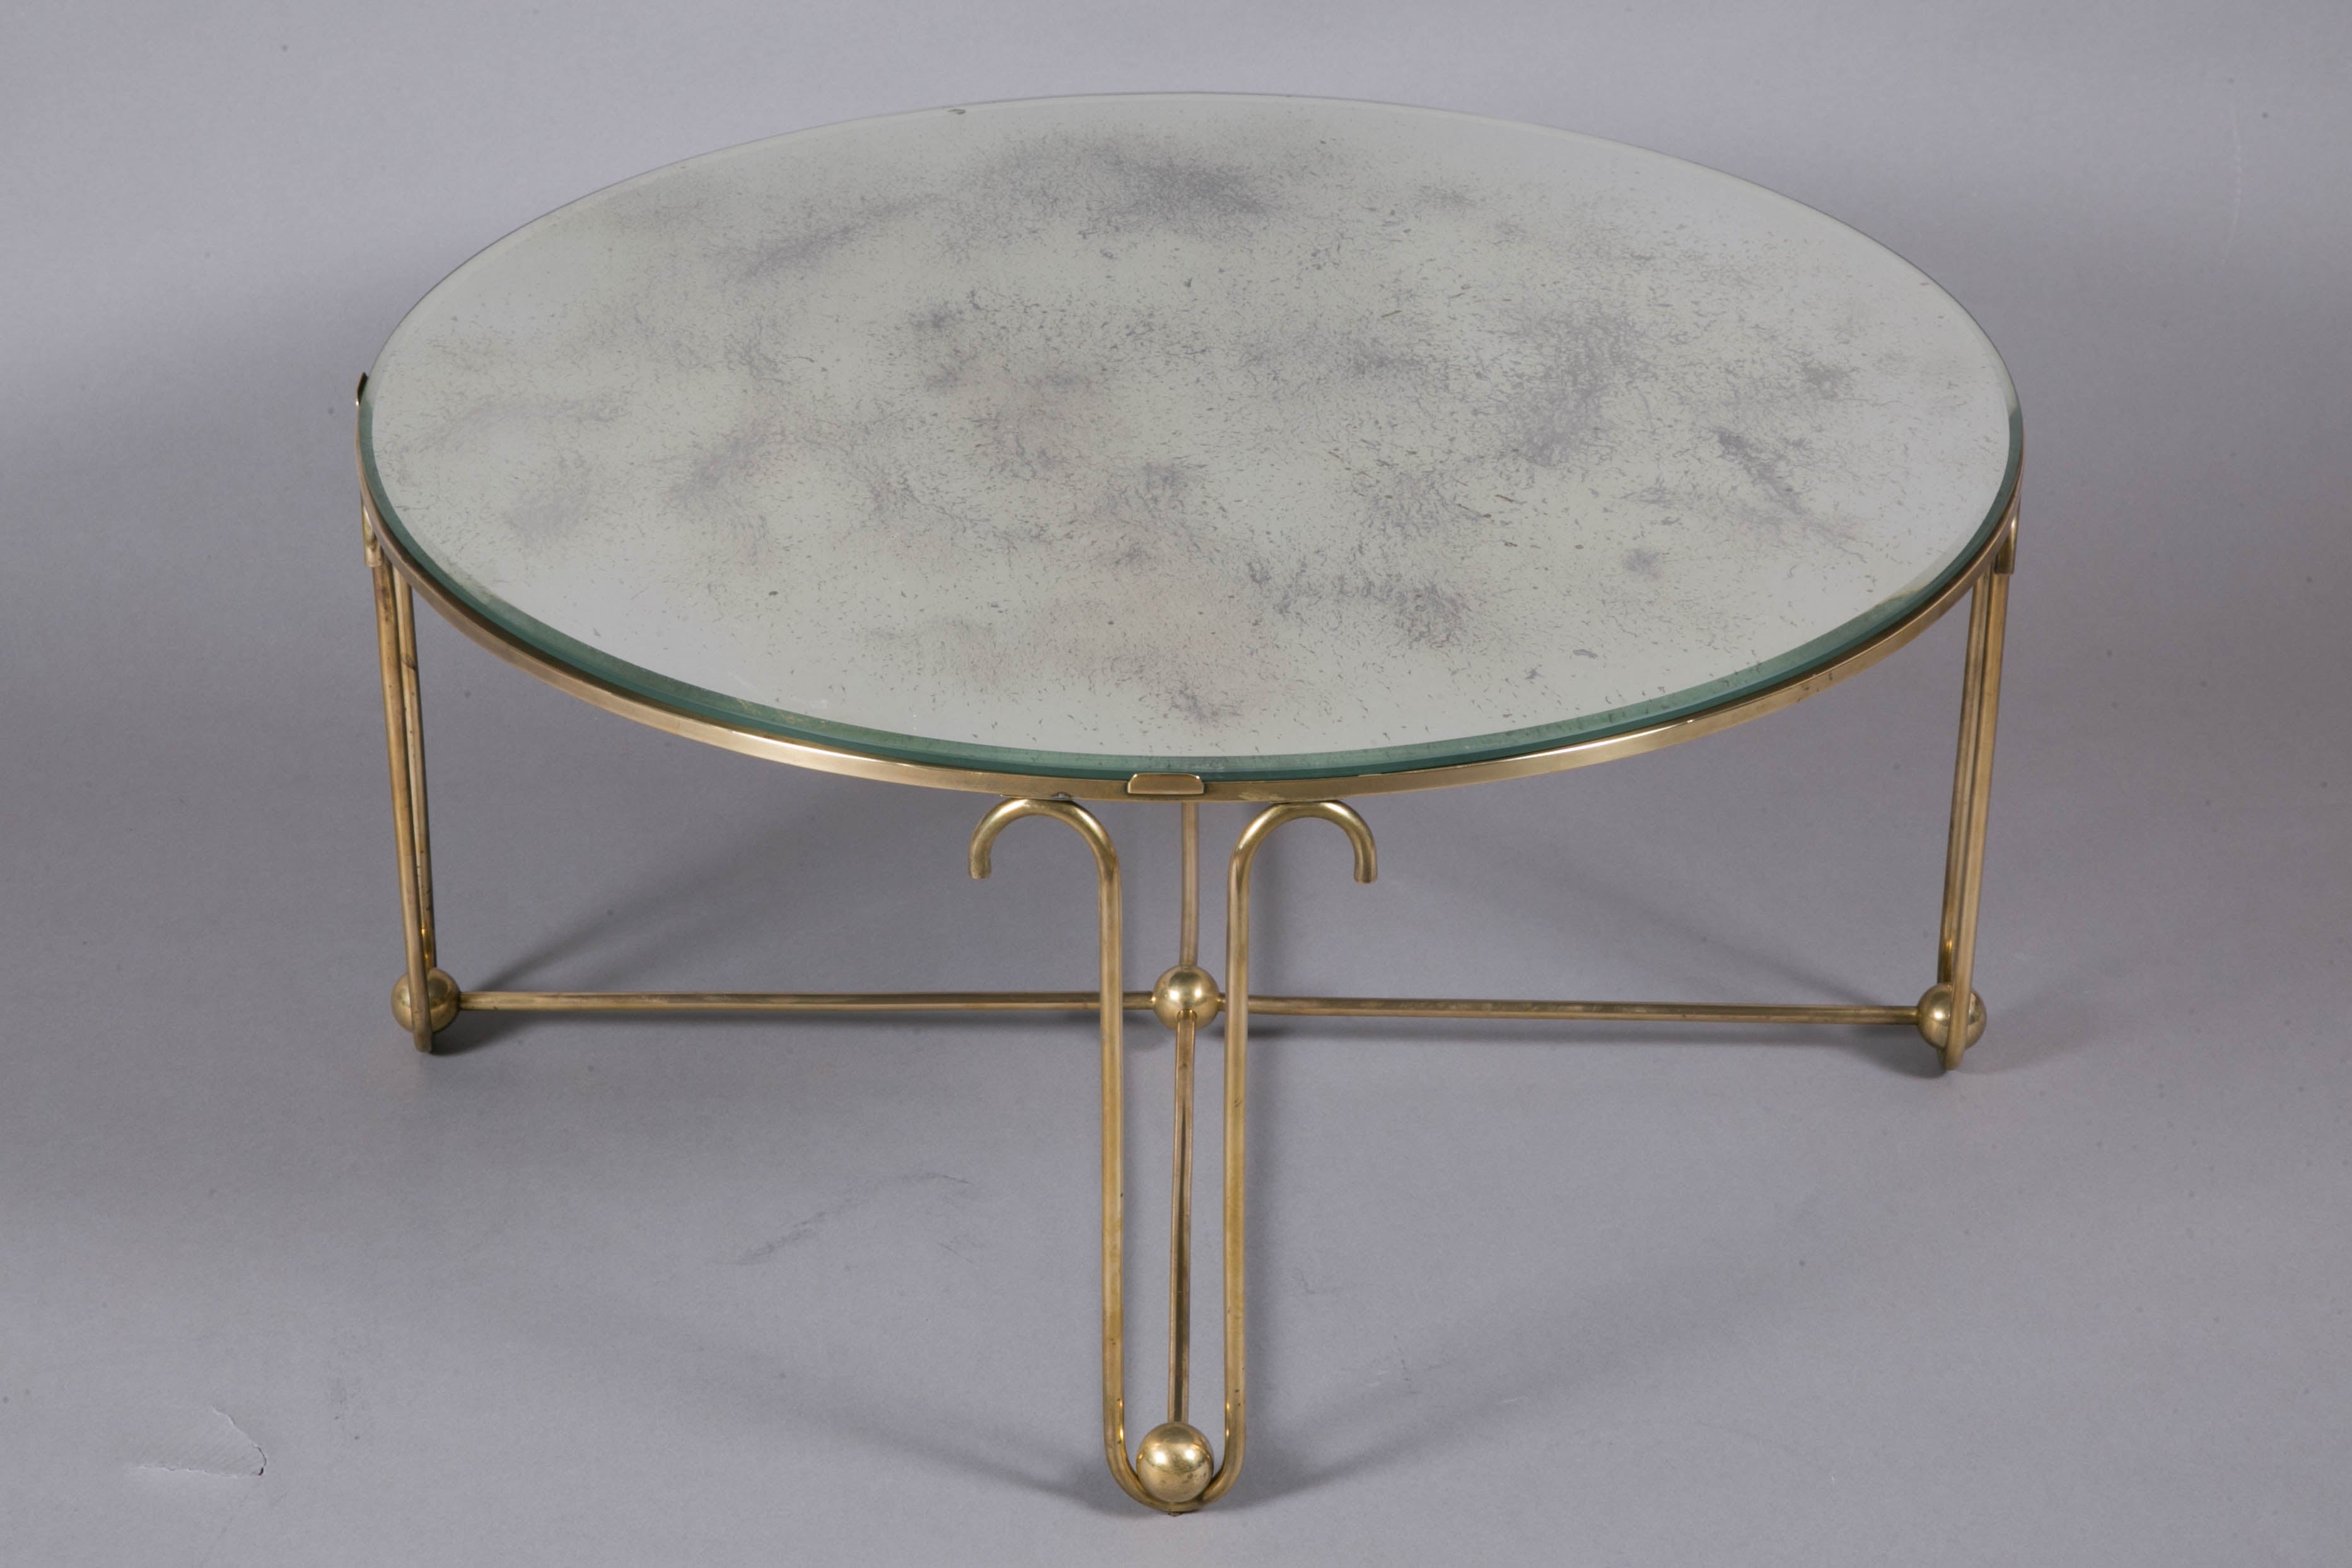 Gilt Brass Coffee Table with Nesting Tables by Jean Royère, 1950s